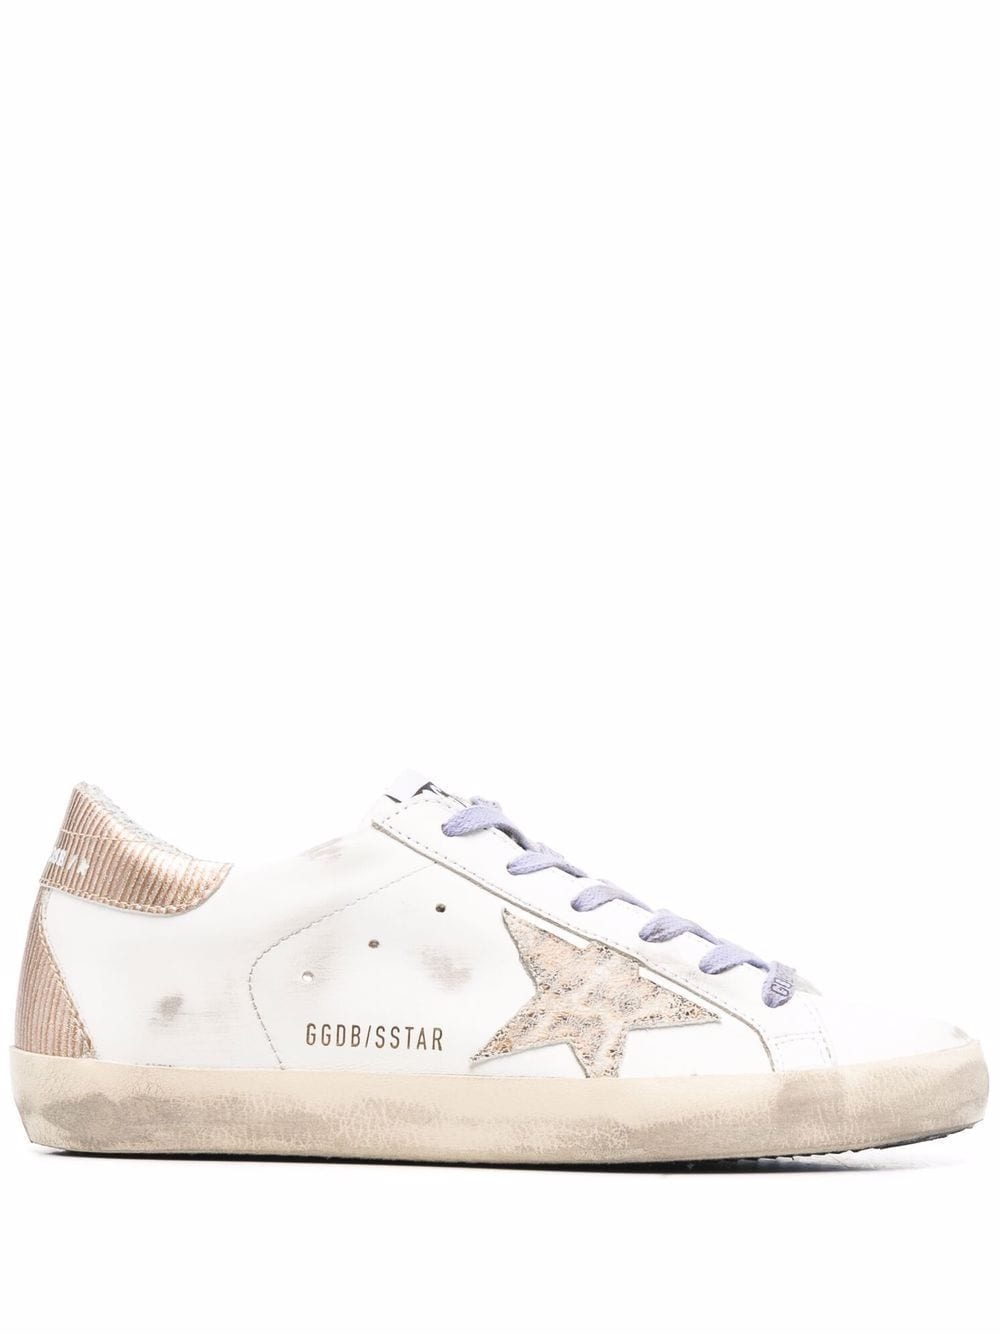 Golden Goose Deluxe Brand Shoes White Woman - 5